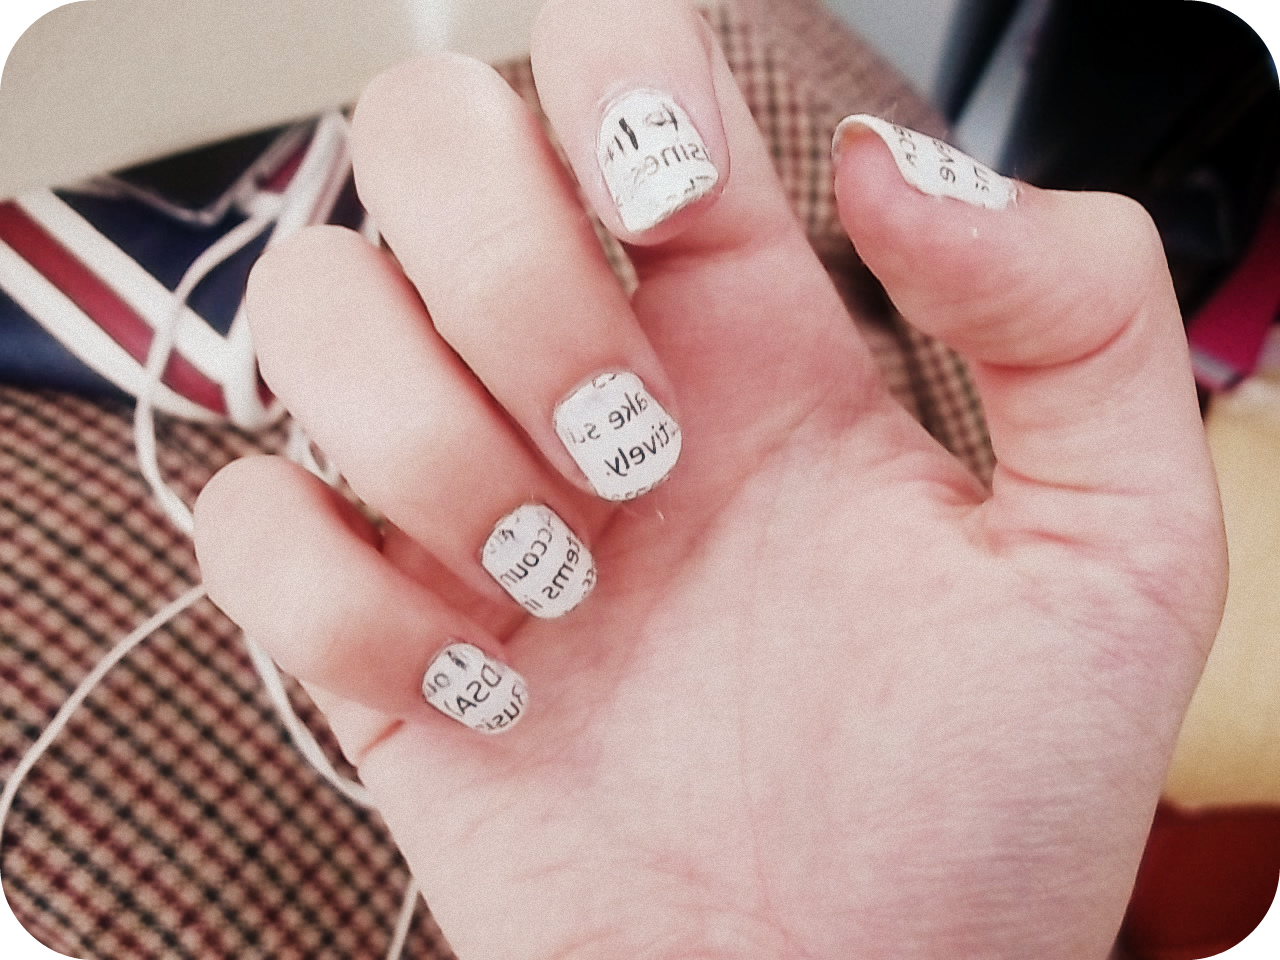 How To Get Newspaper Nails With Water